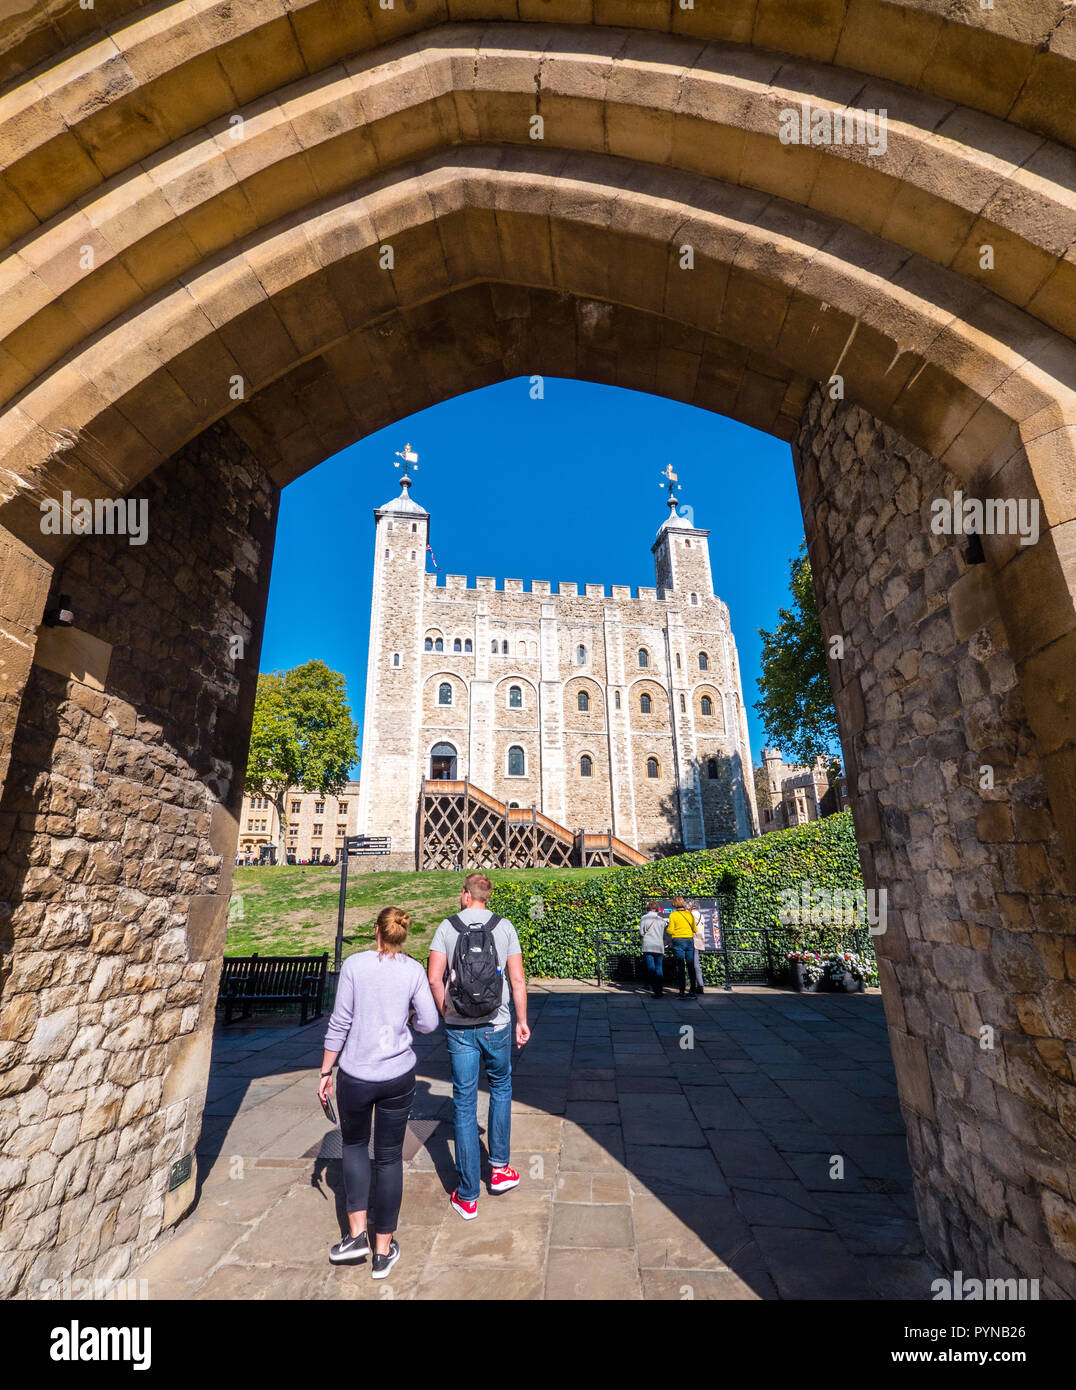 Tourists Walking, Gateway to Innermost Ward, With White Tower View, Tower of London, London, England, UK, GB. Stock Photo